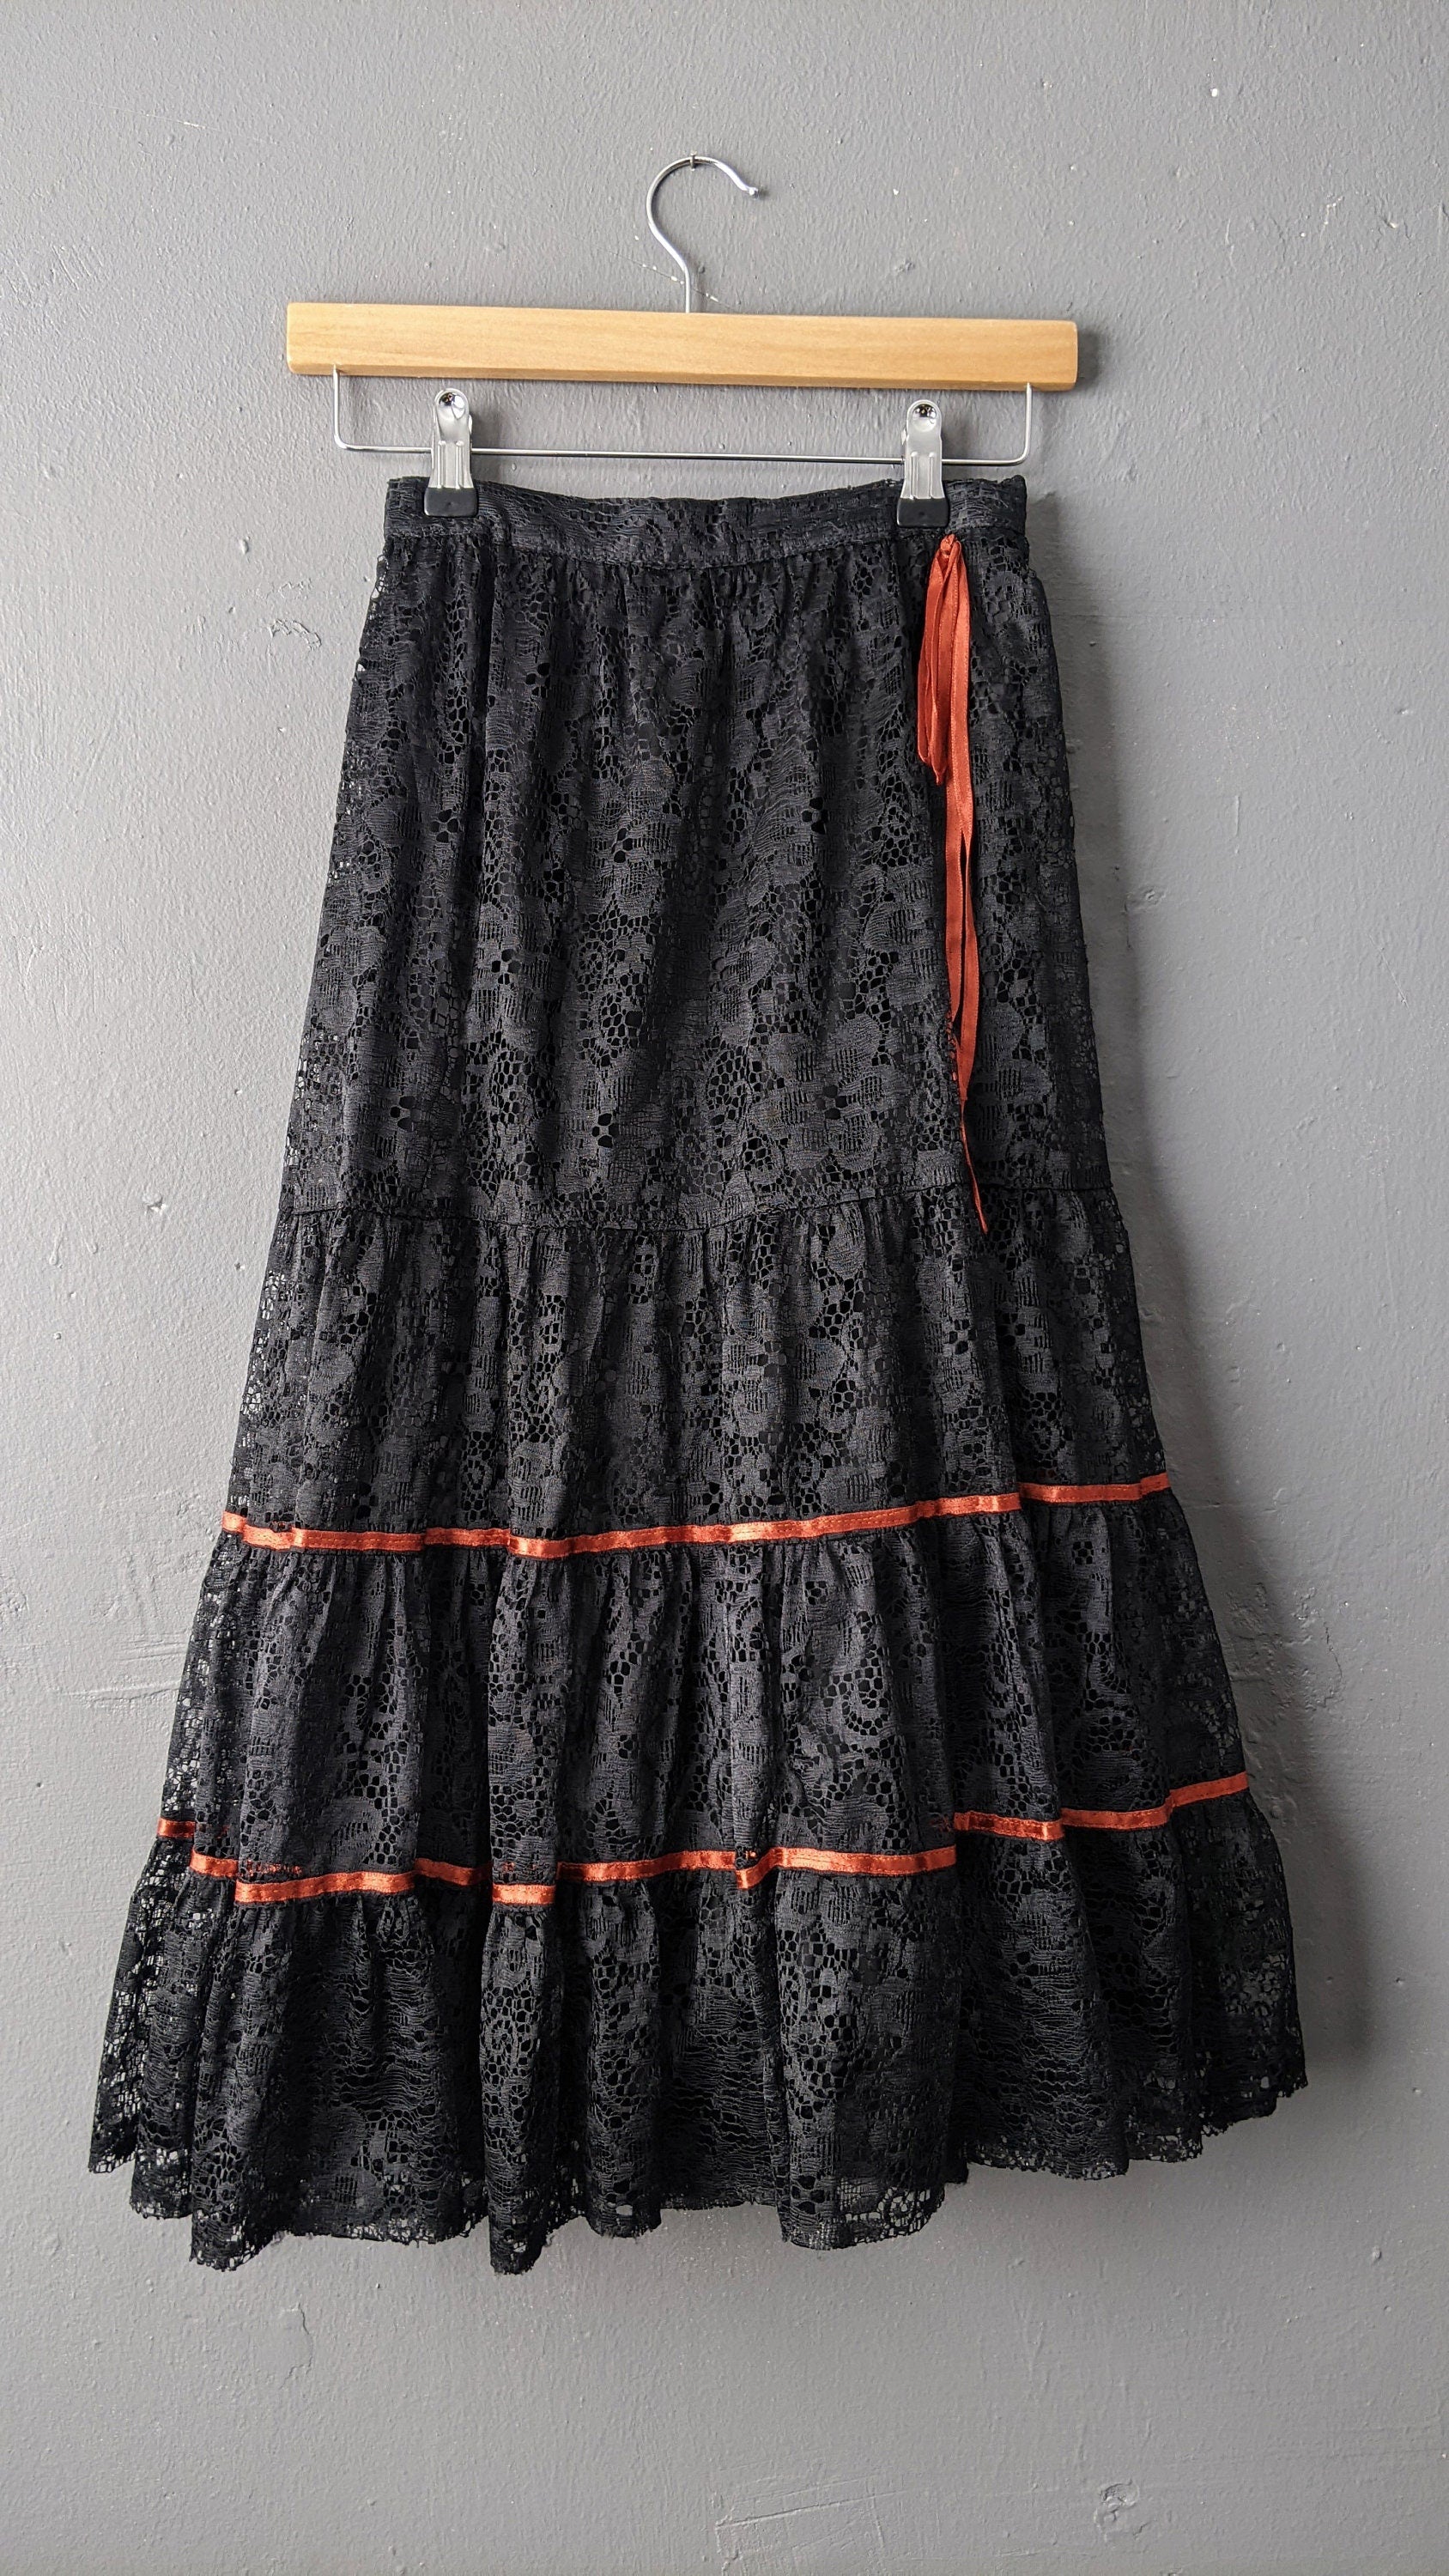 80s Black Tiered Lace Skirt by C&A, Gothic Gypsy, Dark Bohemian, Size Small